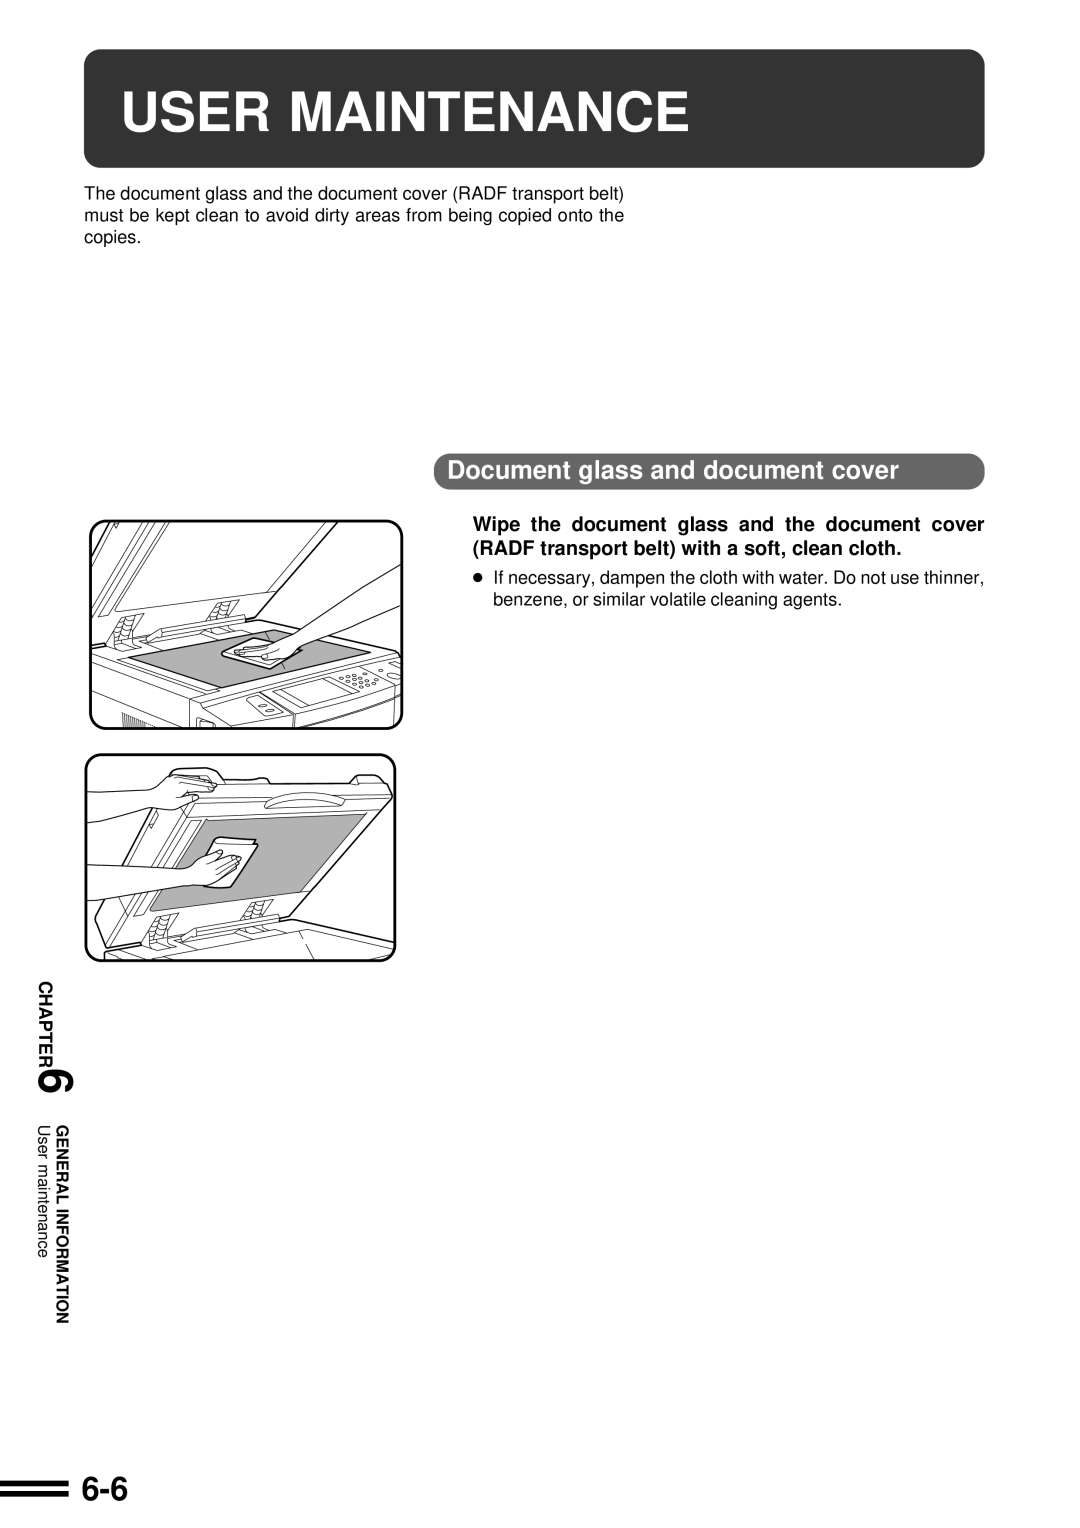 Sharp AR-287 manual User Maintenance, Document glass and document cover 